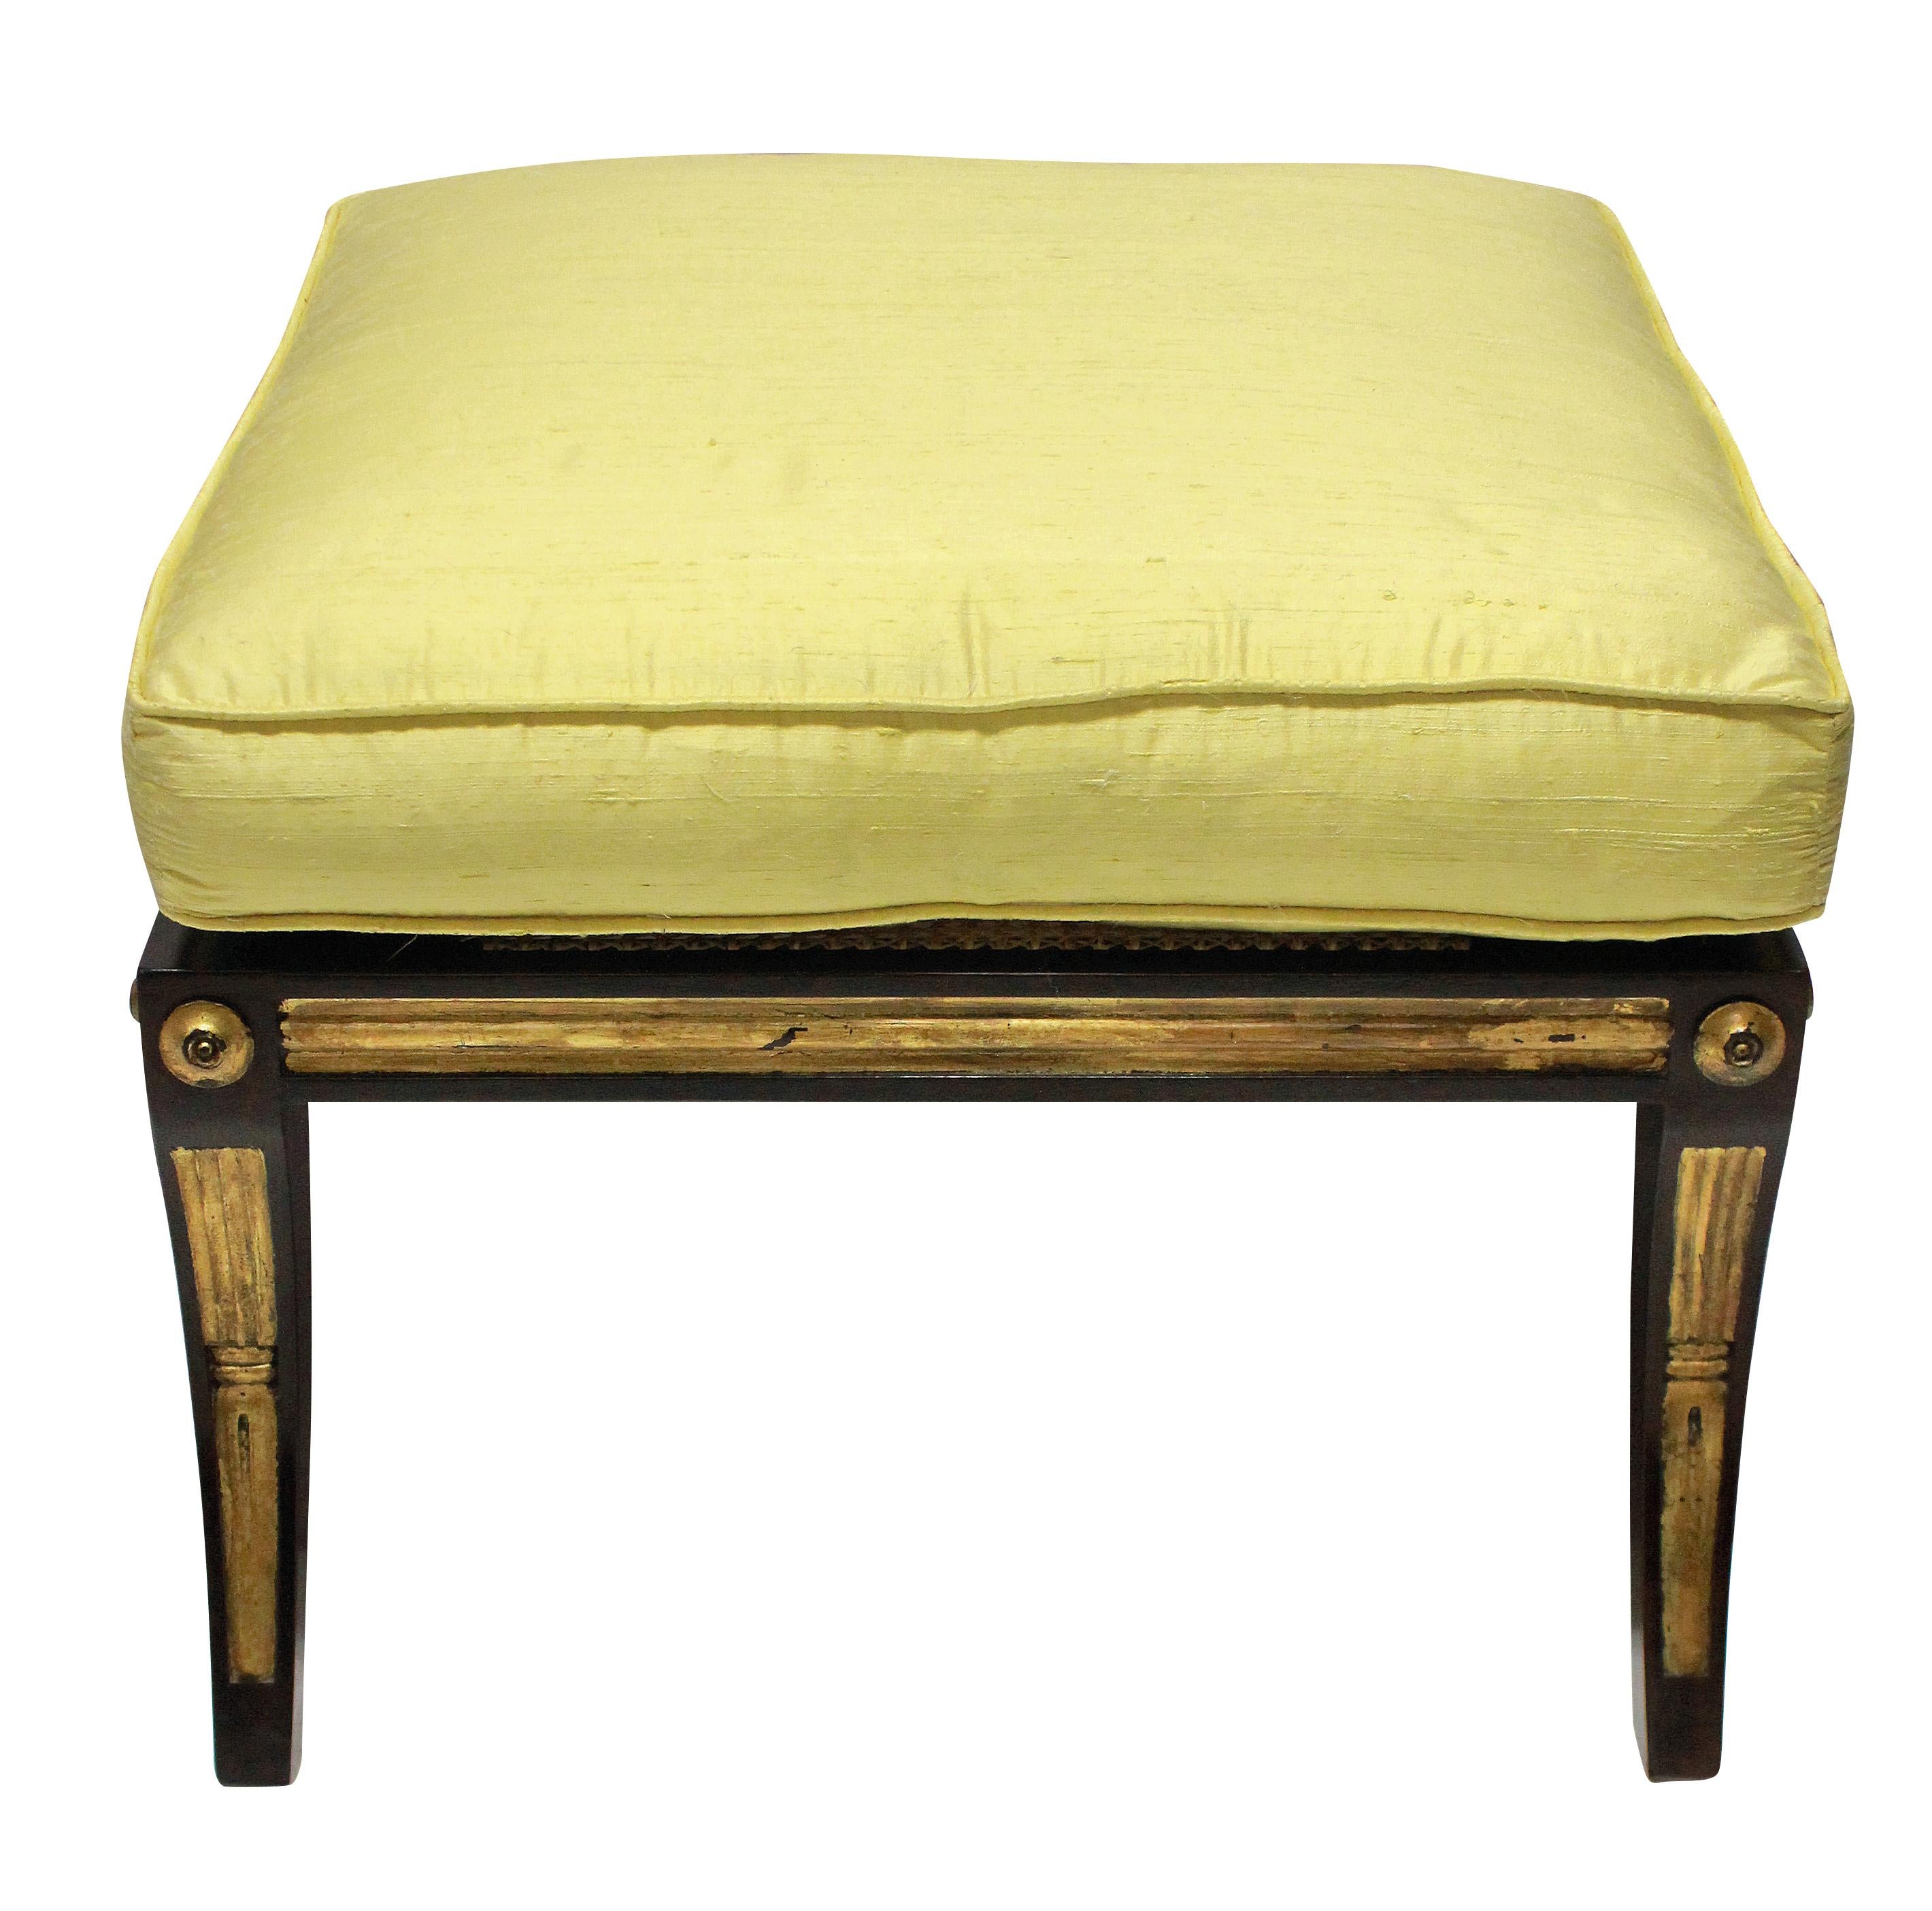 An English Regency style stool, in solid rosewood, with parcel-gilt detail and cane seat. The newly upholstered cushion in pale yellow silk.